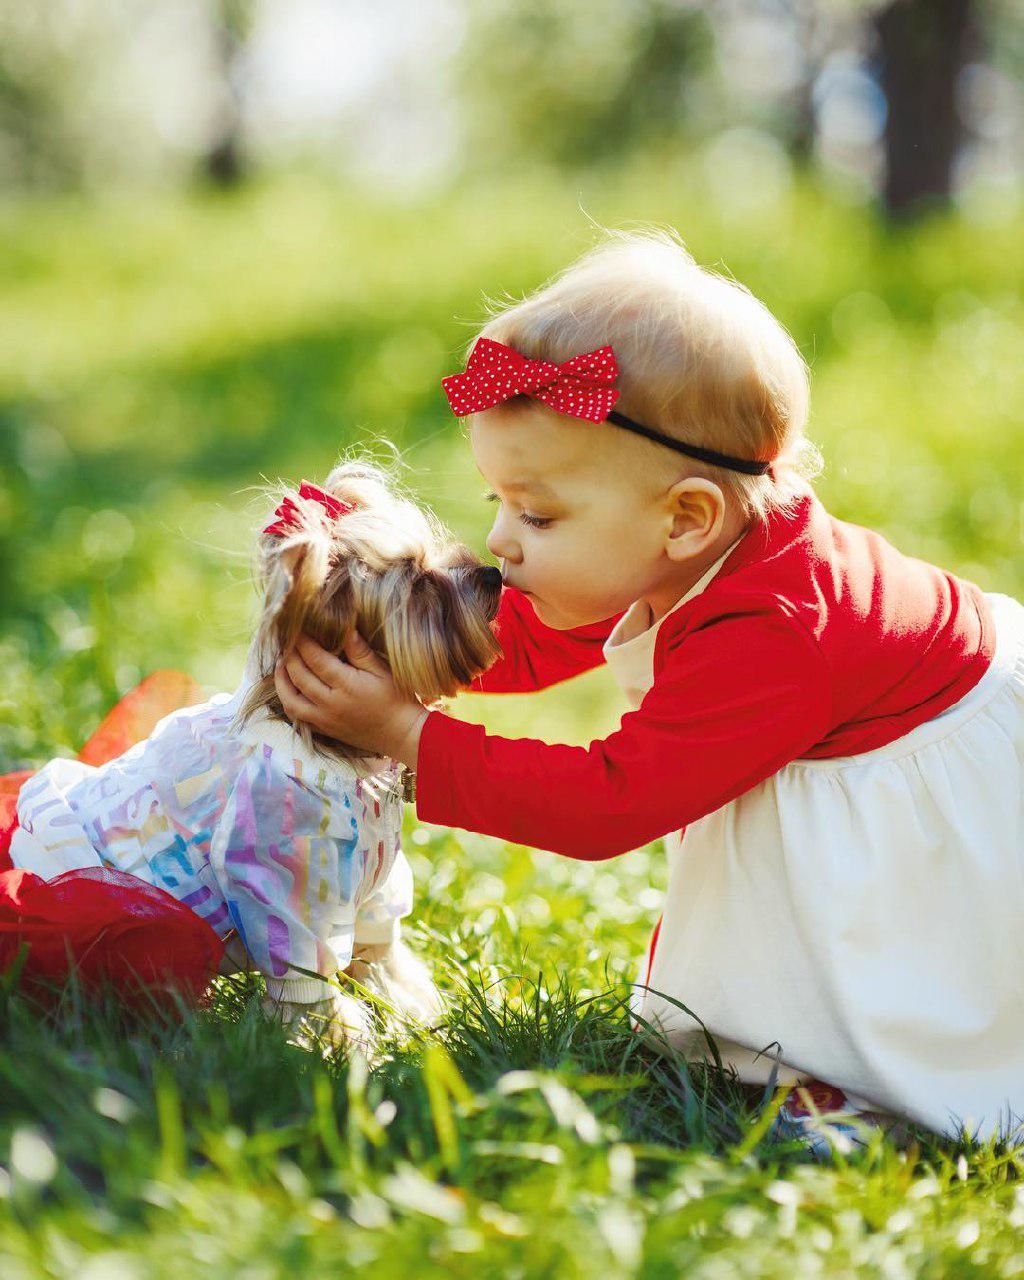 A Yorkshire Terrier wearing a cute dress while sitting on the grass and being kissed by a toddler across her